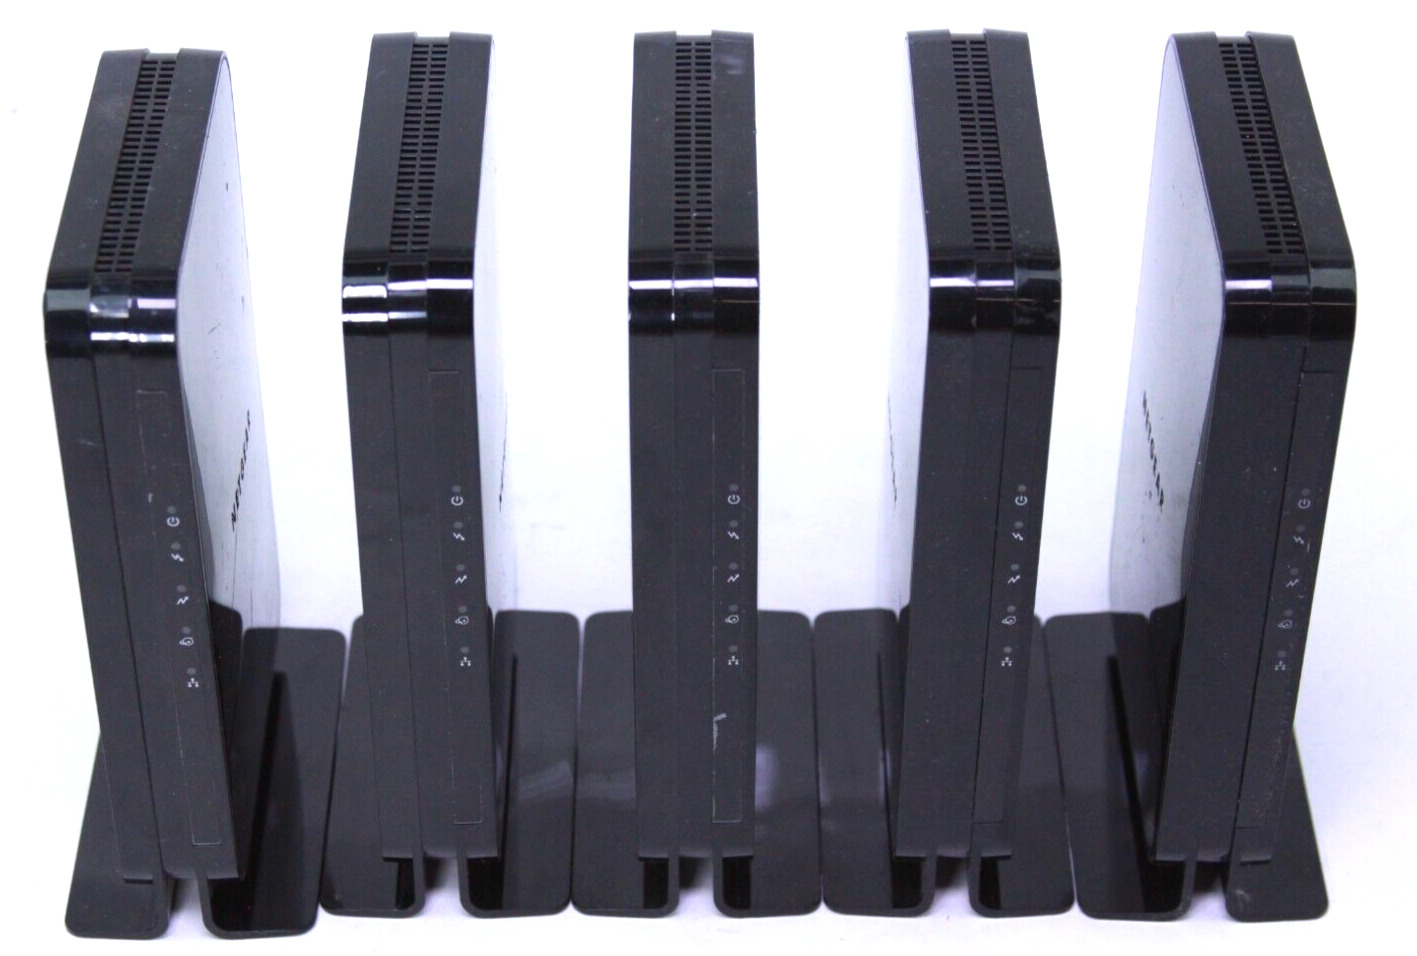 Lot of 5 NETGEAR CM500 High Speed Cable Modem DOCSIS 3.0 - Power Tested